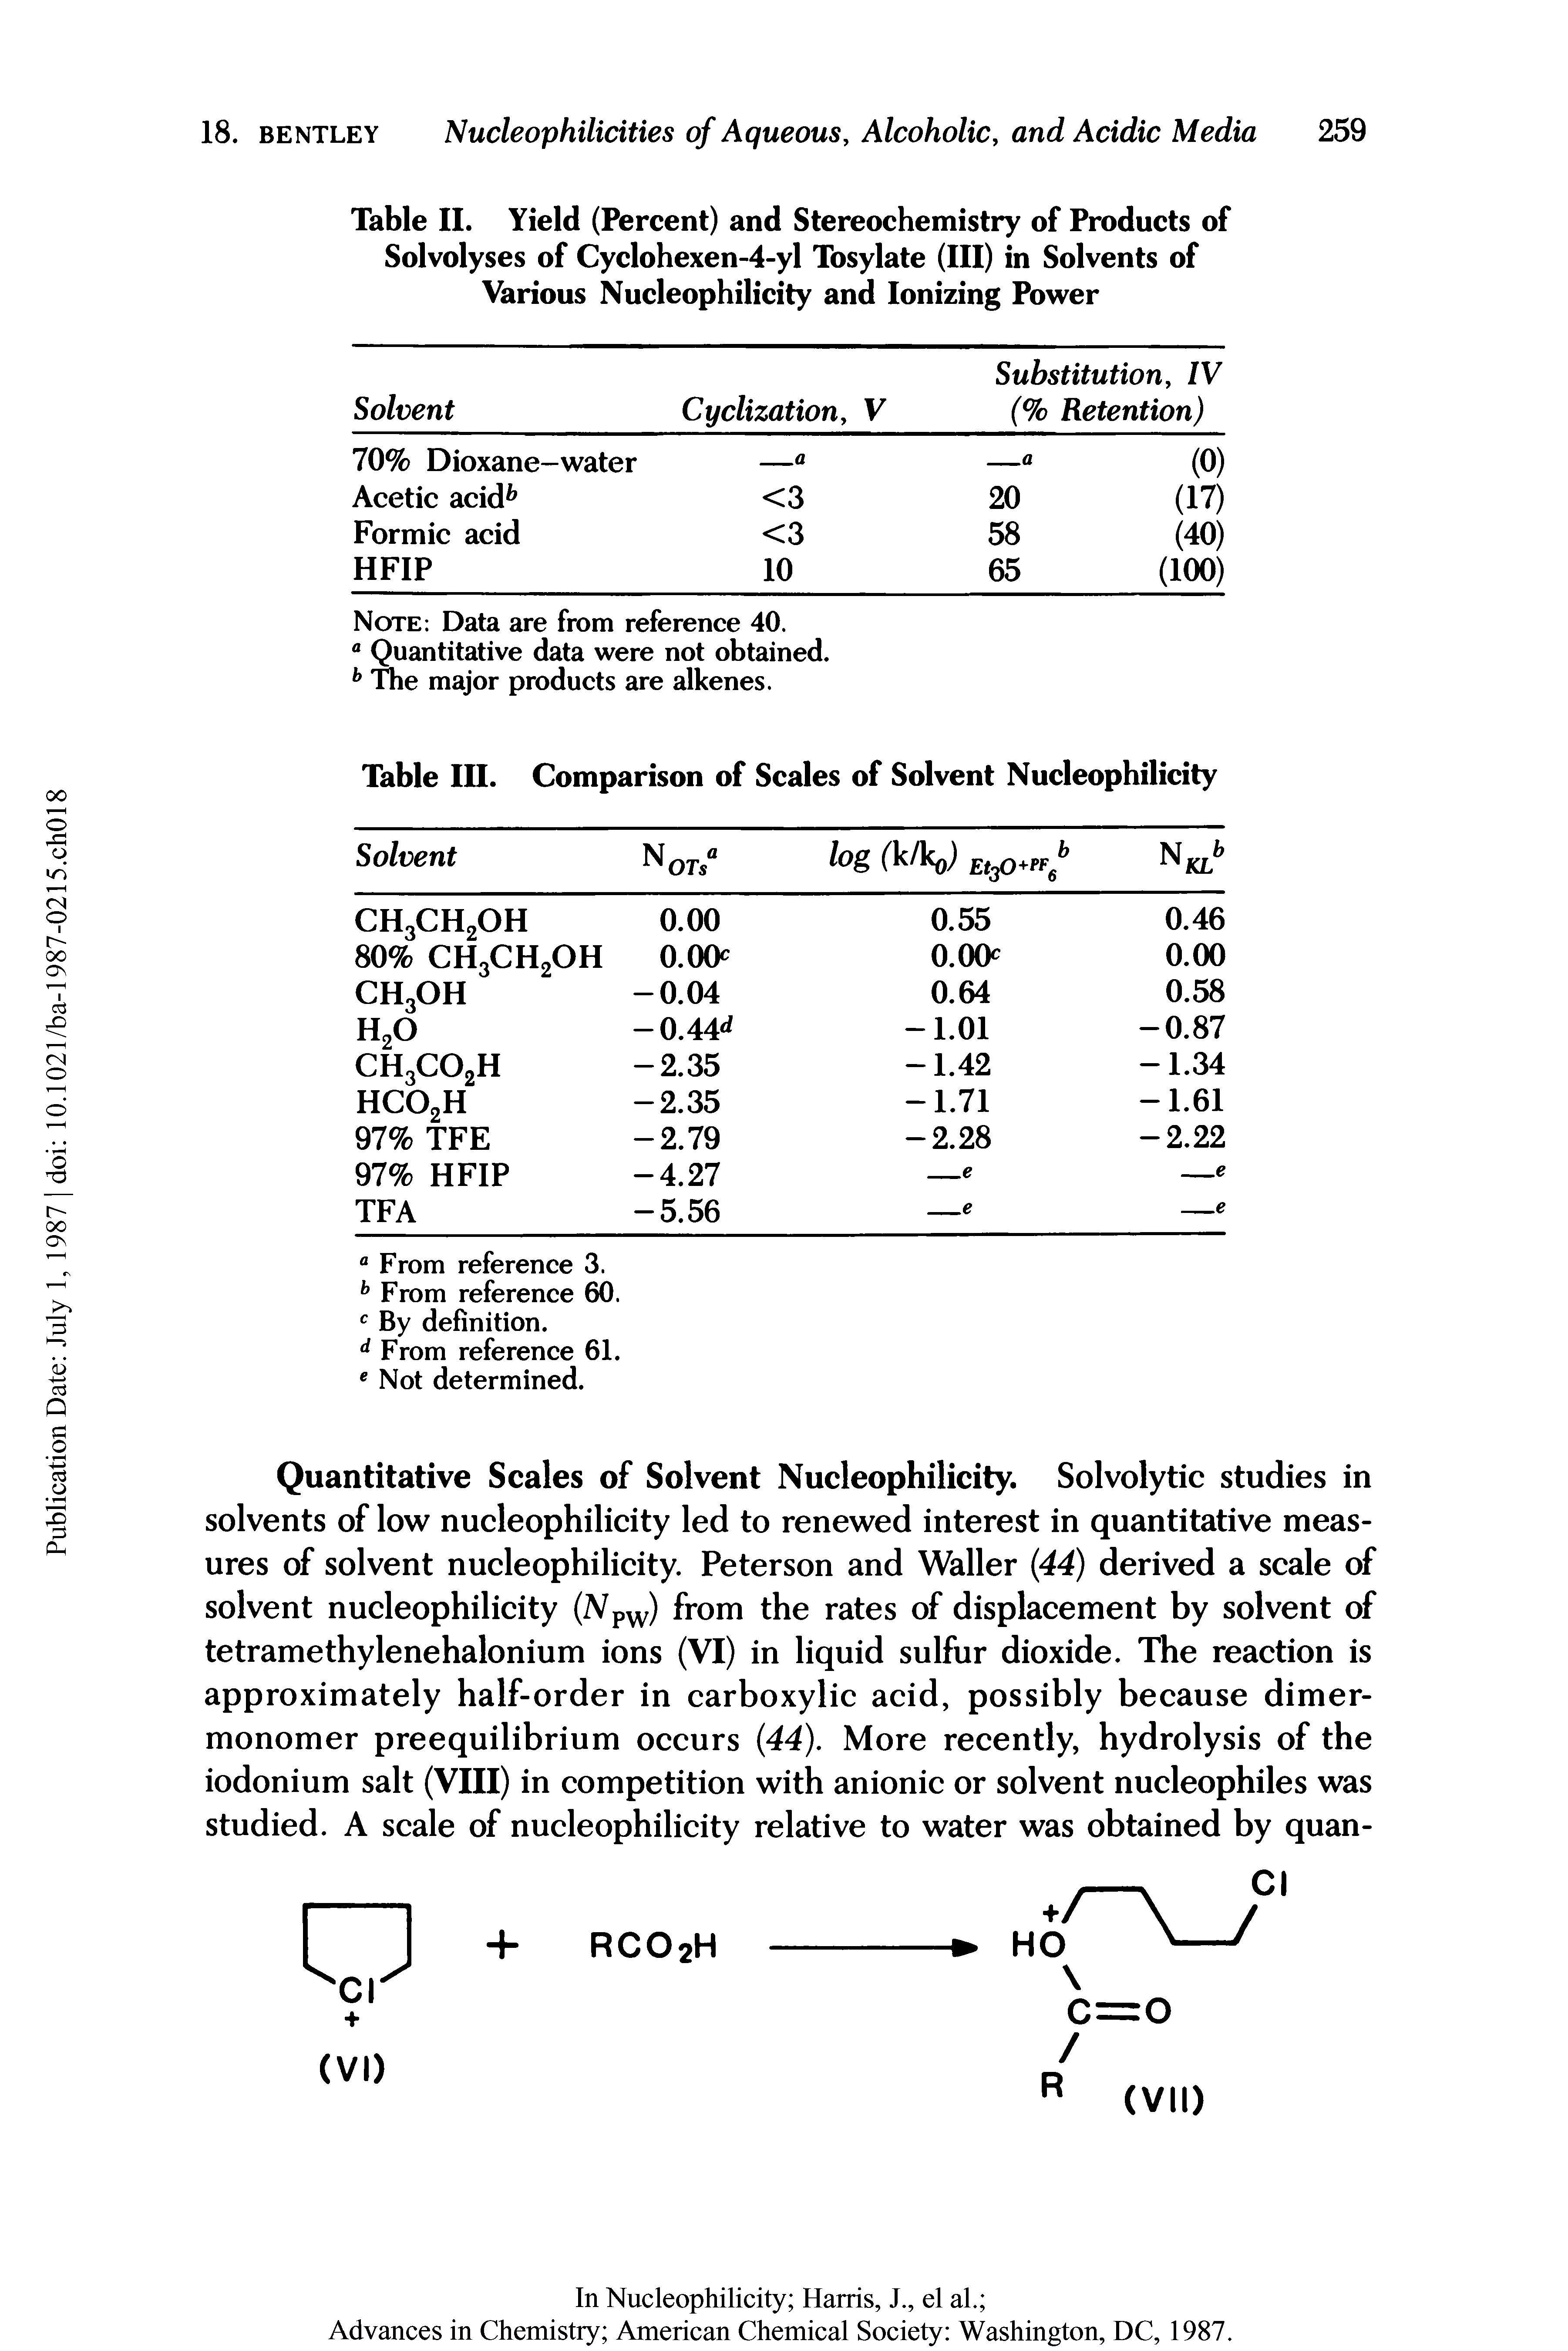 Table II. Yield (Percent) and Stereochemistry of Products of Solvolyses of Cyclohexen-4-yl Tosylate (III) in Solvents of Various Nucleophilicity and Ionizing Power...